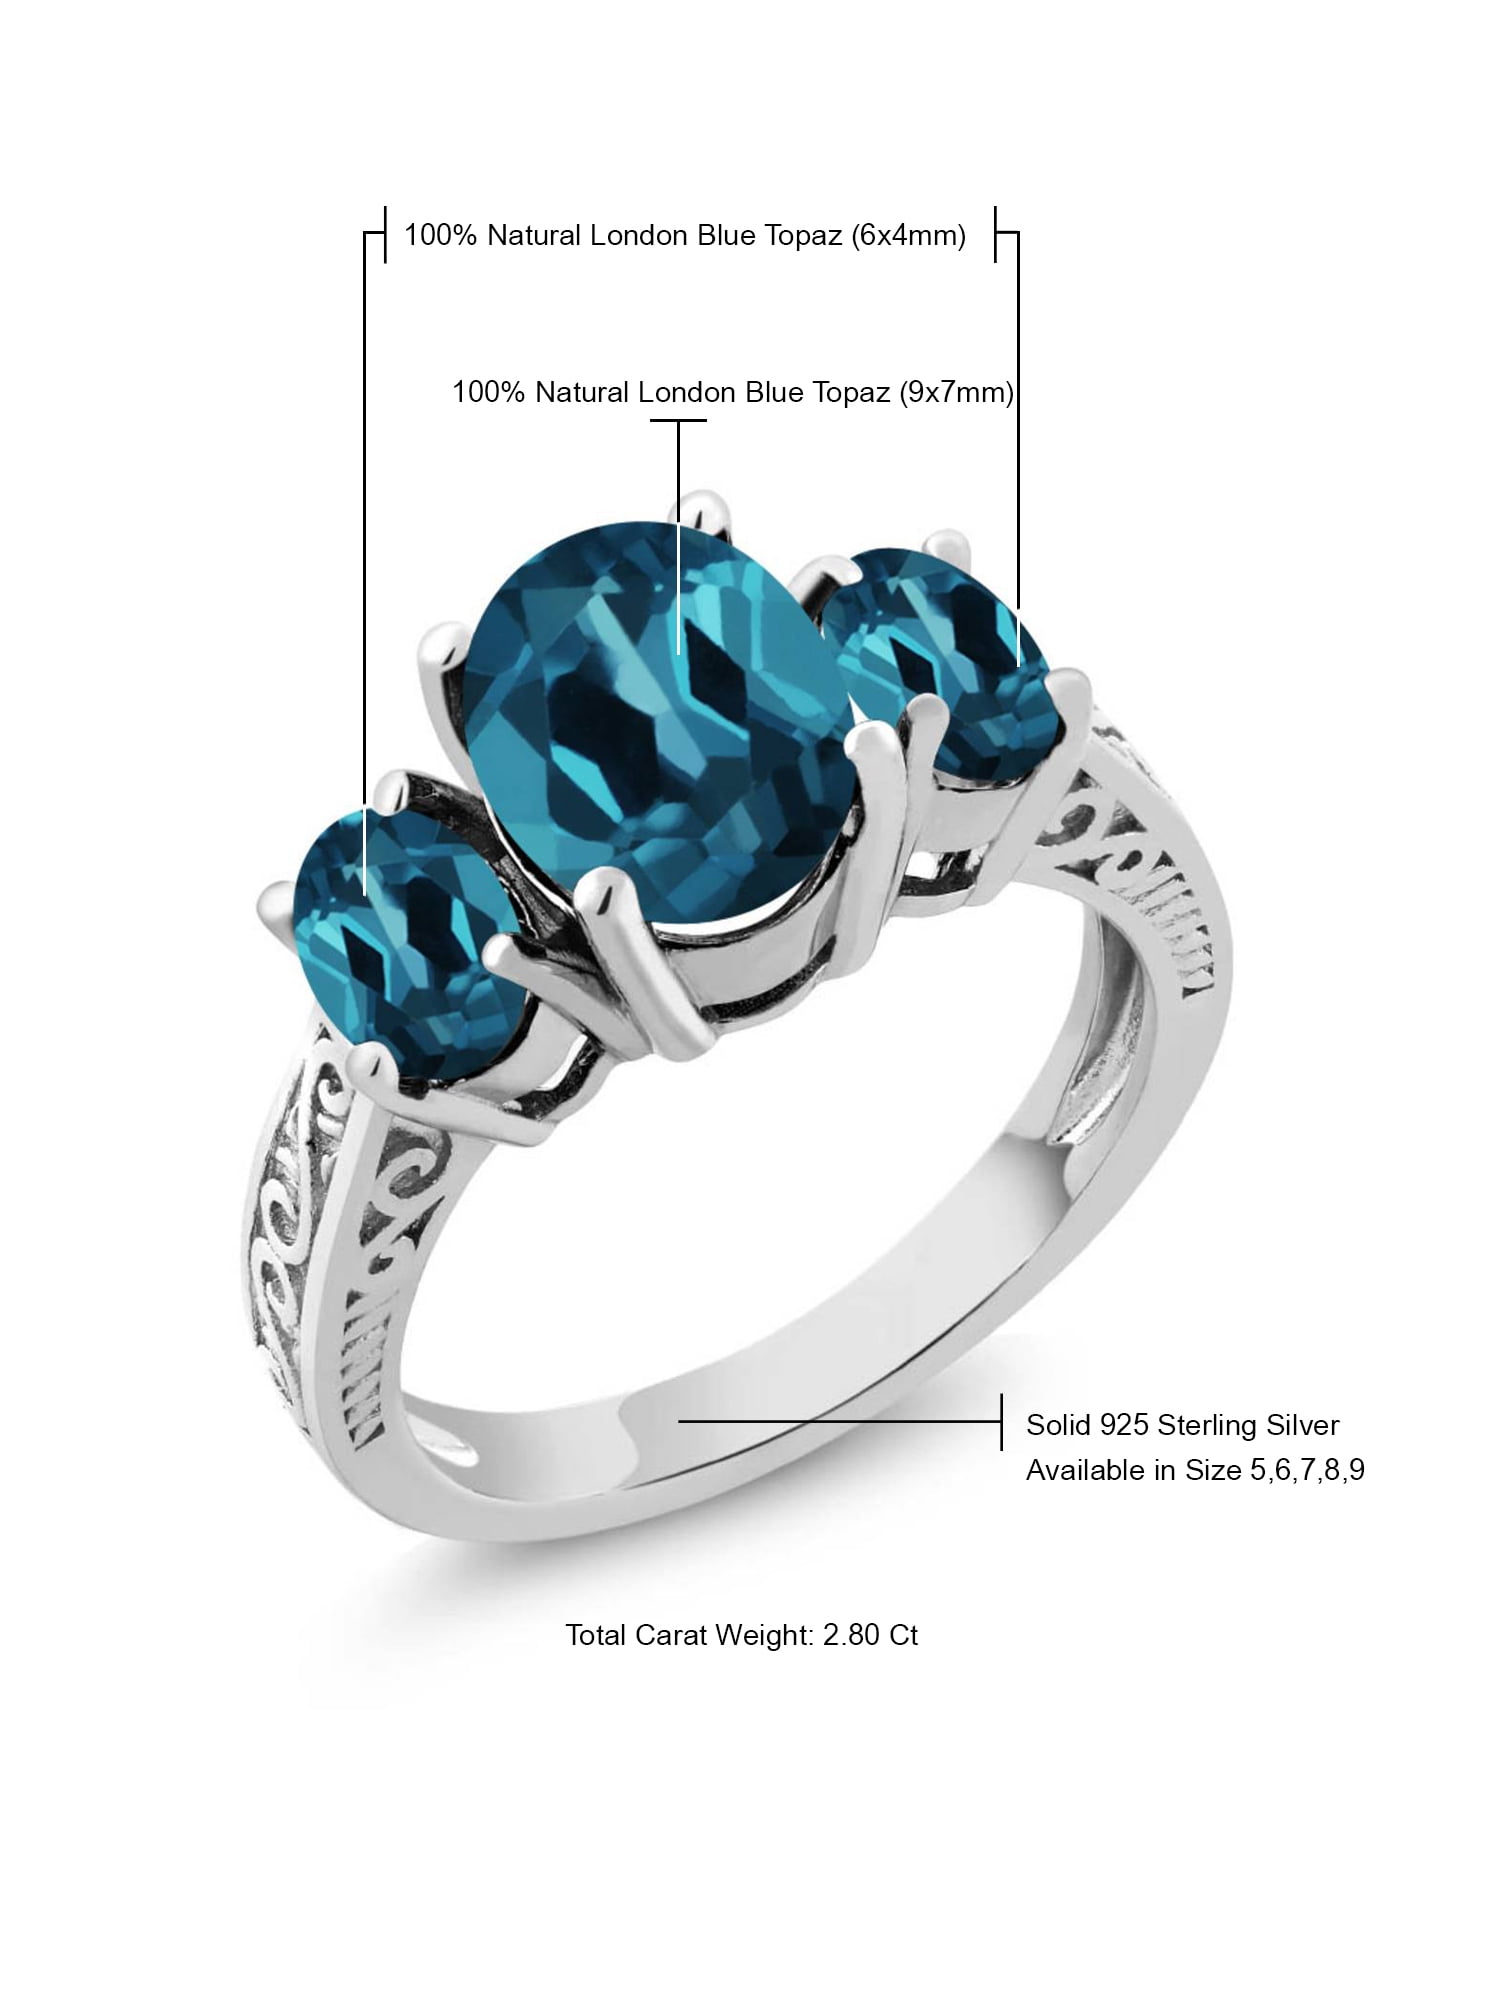 1.36 Cttw, Oval 6X4MM, Gemstone Available 5,6,7,8,9 Gem Stone King 925 Sterling Silver London Blue Topaz Women's Ring 